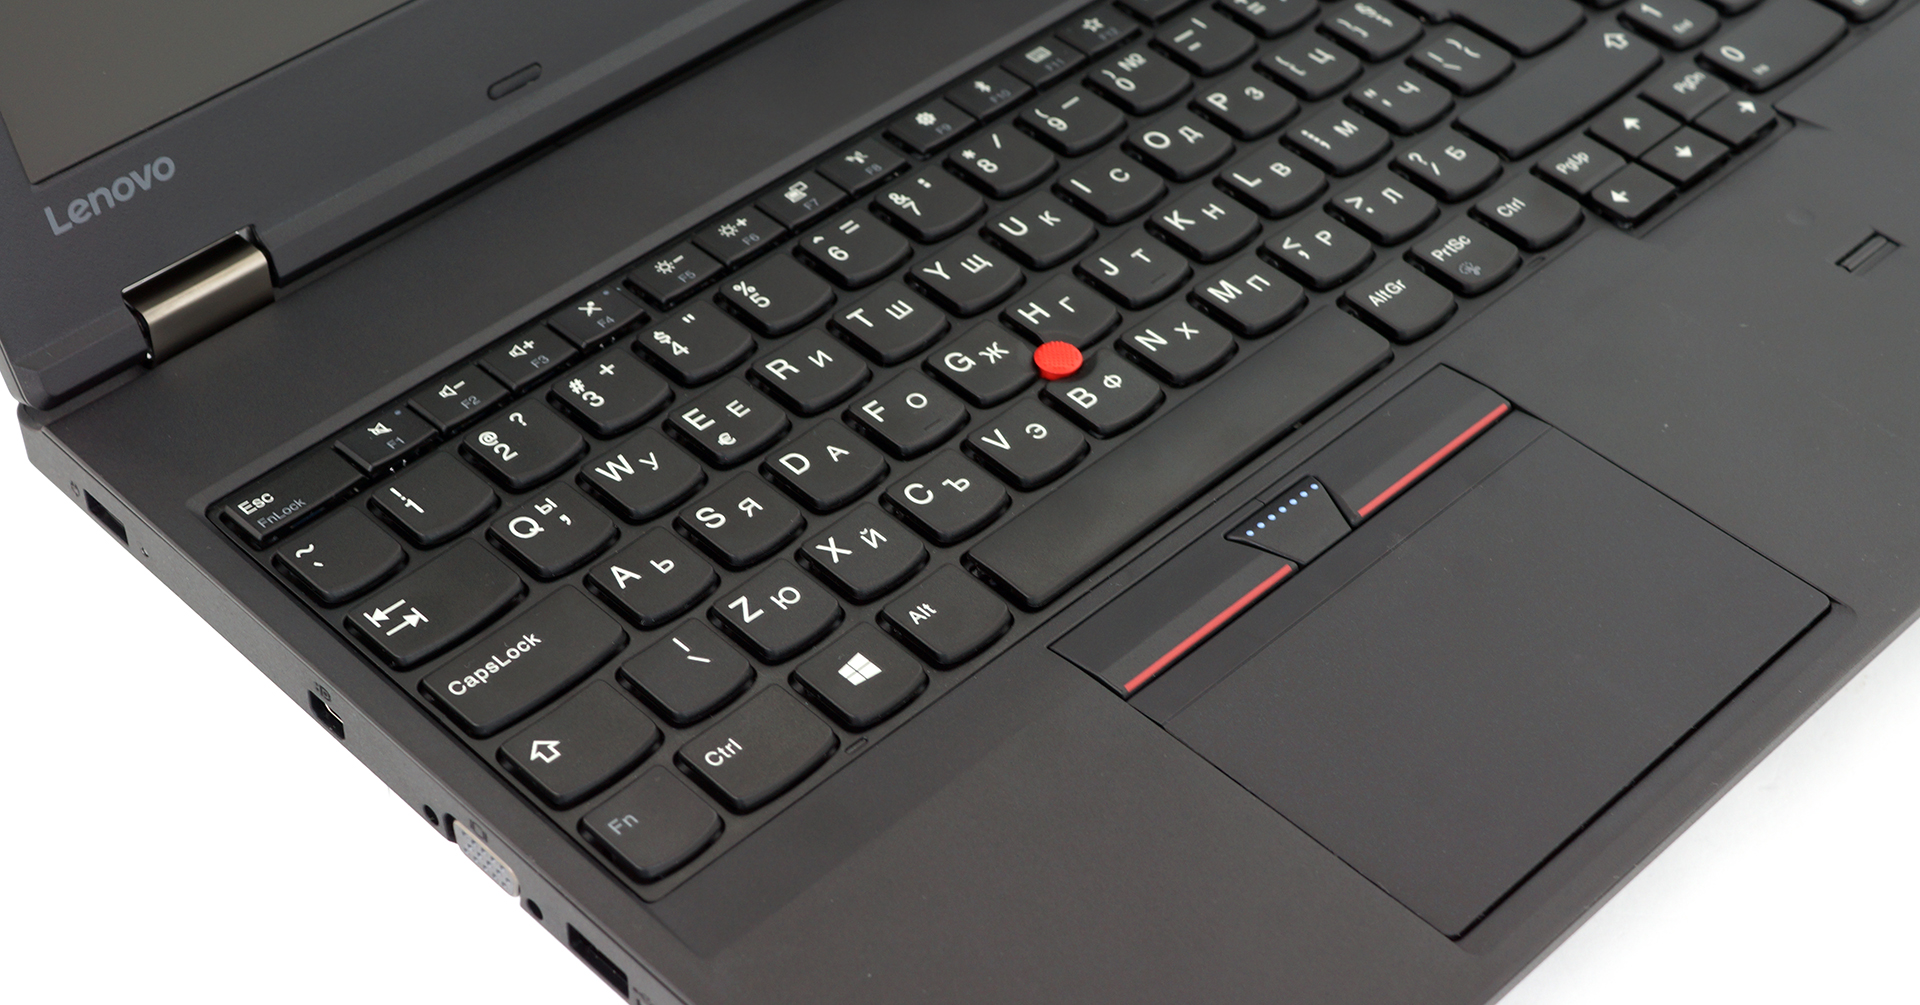 Lenovo ThinkPad L570 review - clunky but reliable | LaptopMedia.com